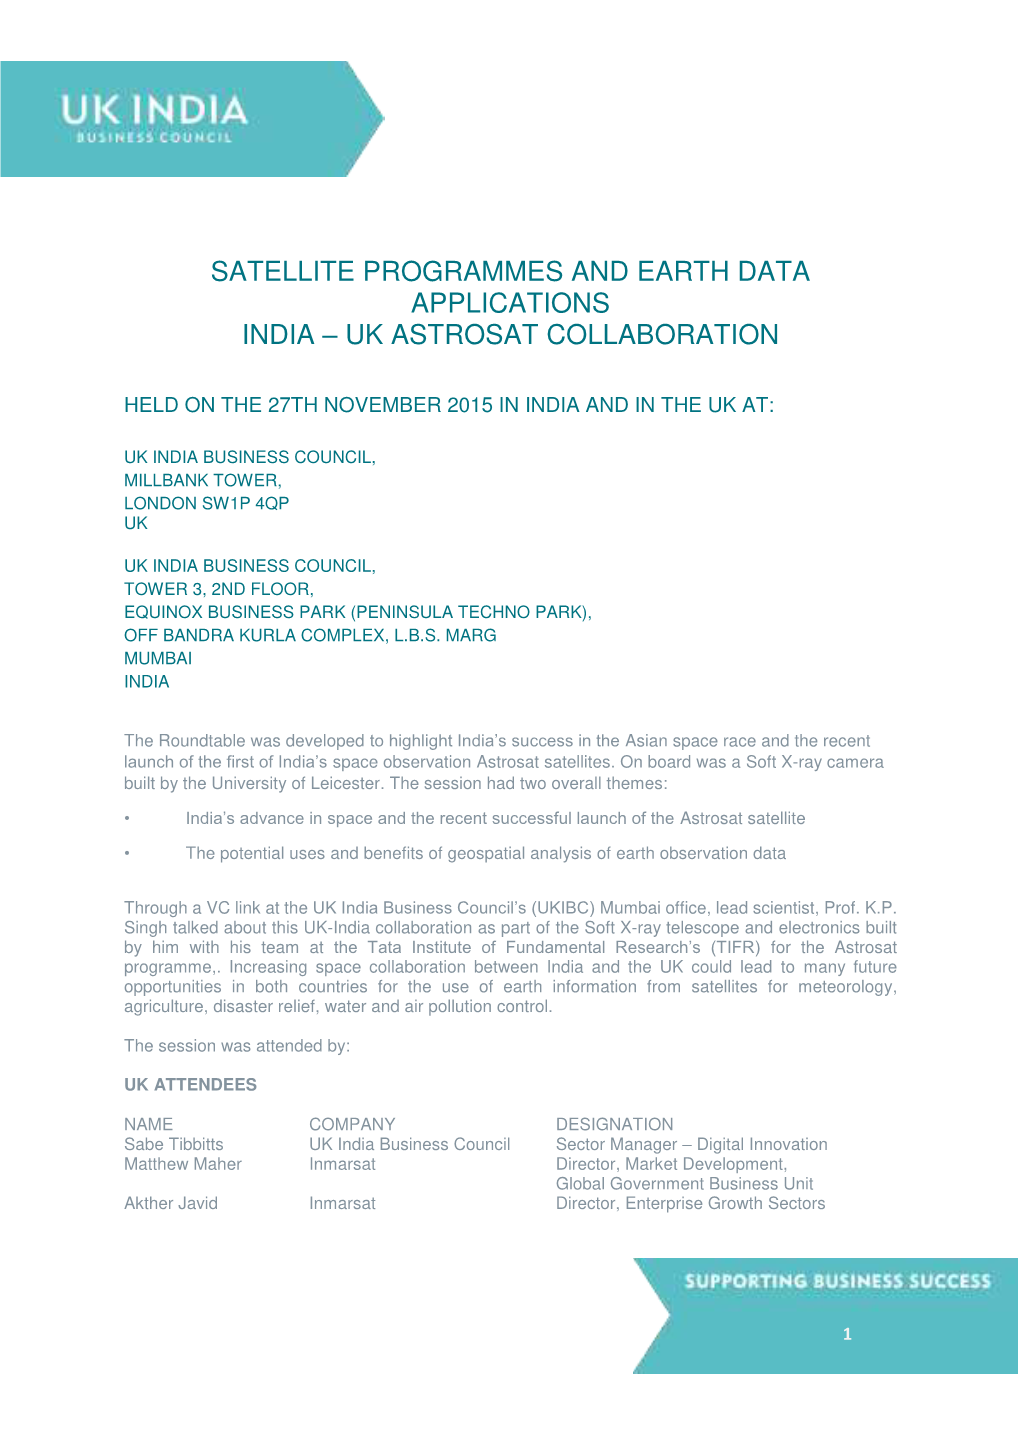 Satellite Programmes and Earth Data Applications India – Uk Astrosat Collaboration